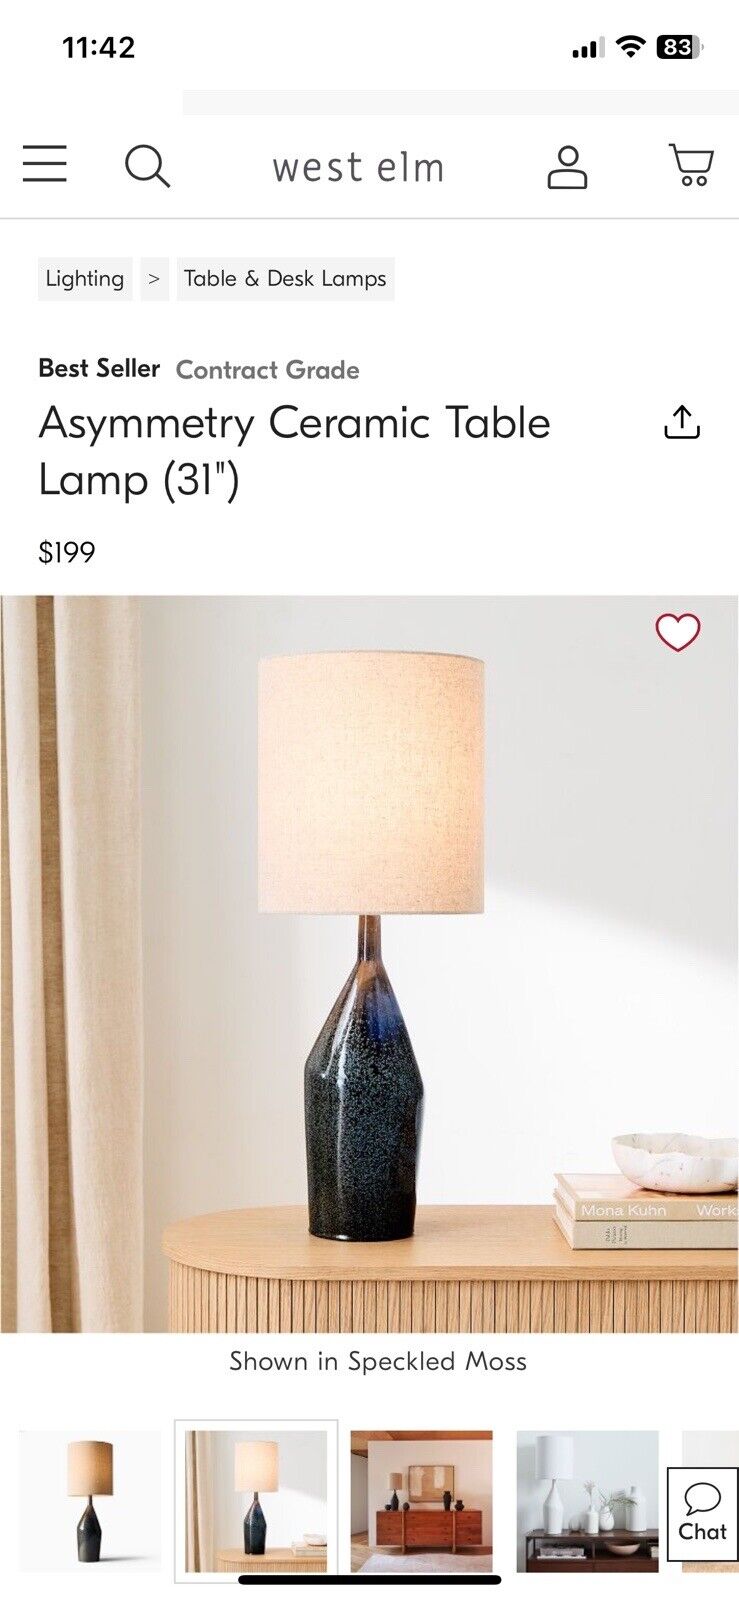 West Elm Speckled Moss Lamp 31” New In Box